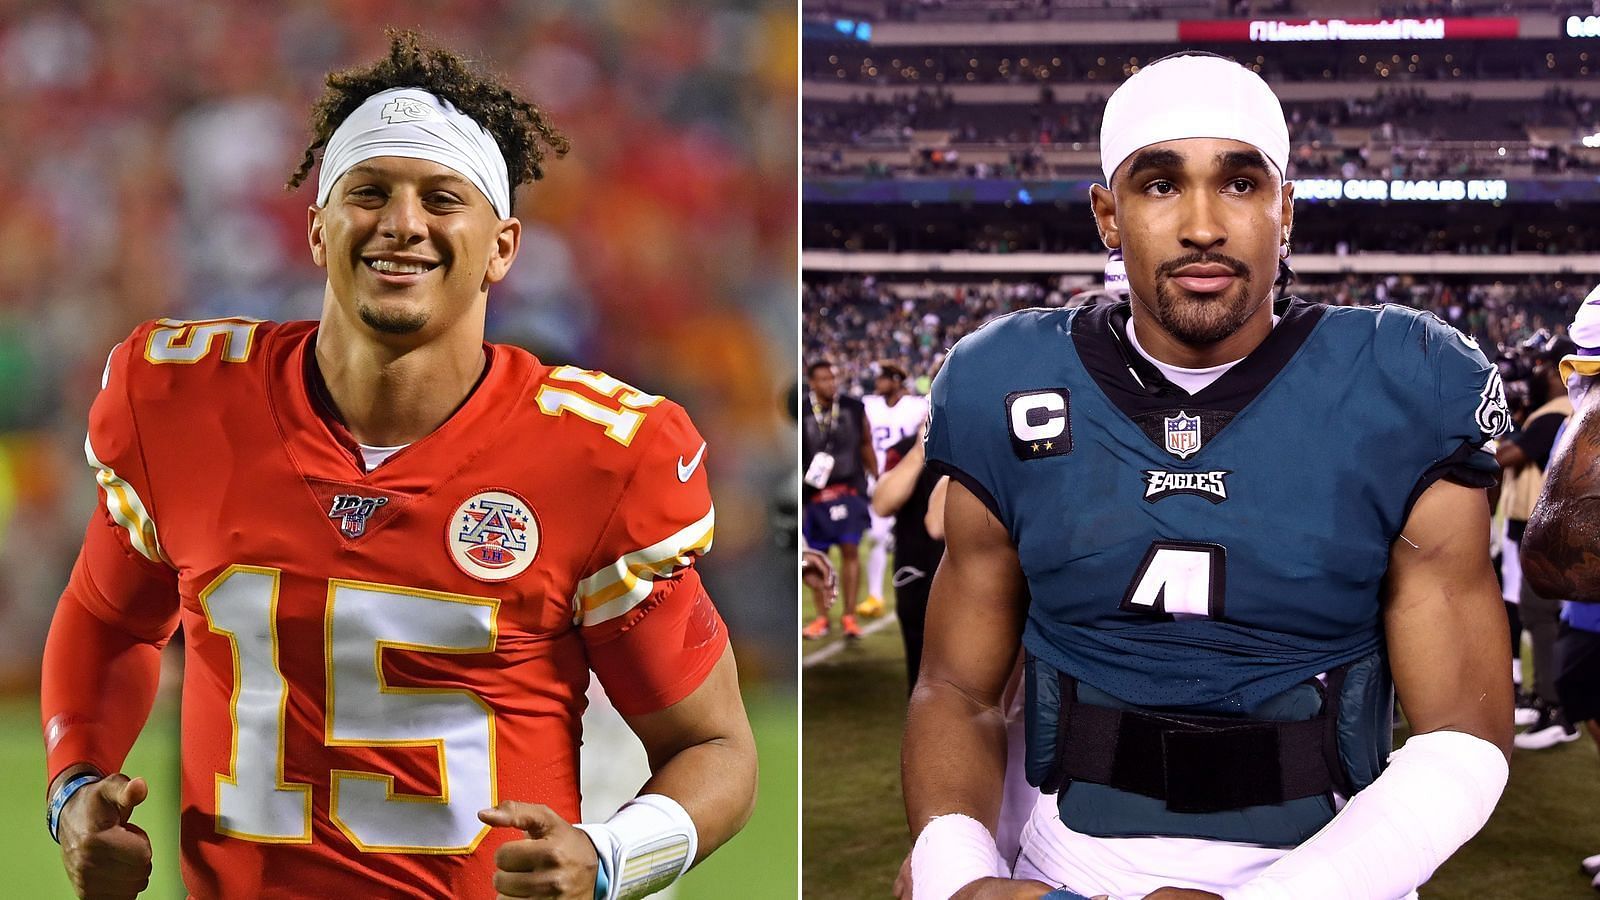 (L-to-R) Patrick Mahomes and Jalen Hurts